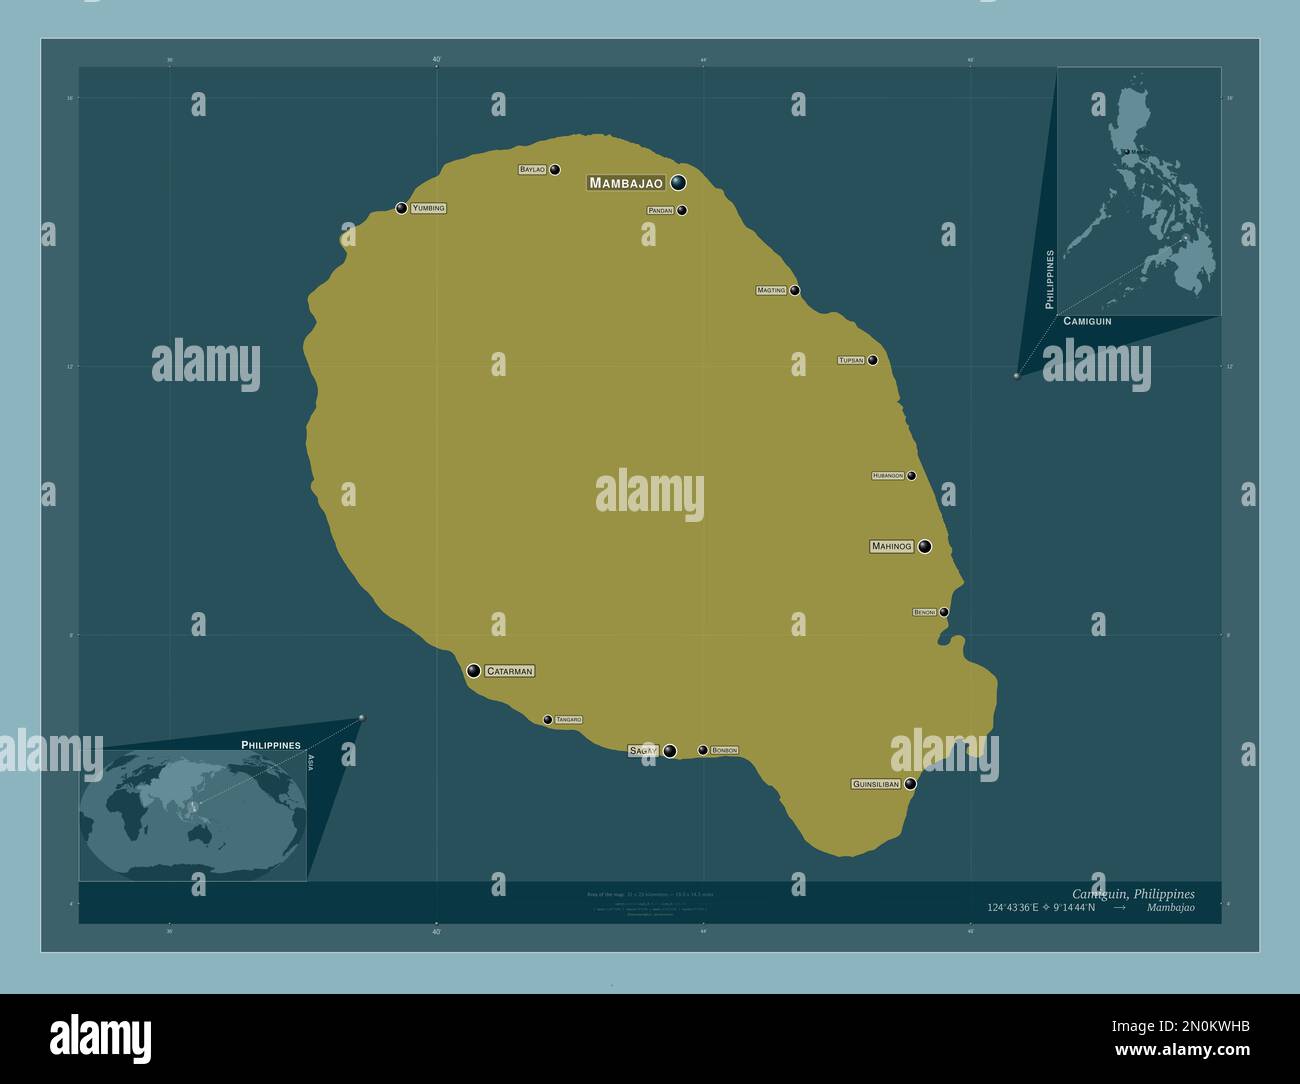 Camiguin, province of Philippines. Solid color shape. Locations and names of major cities of the region. Corner auxiliary location maps Stock Photo